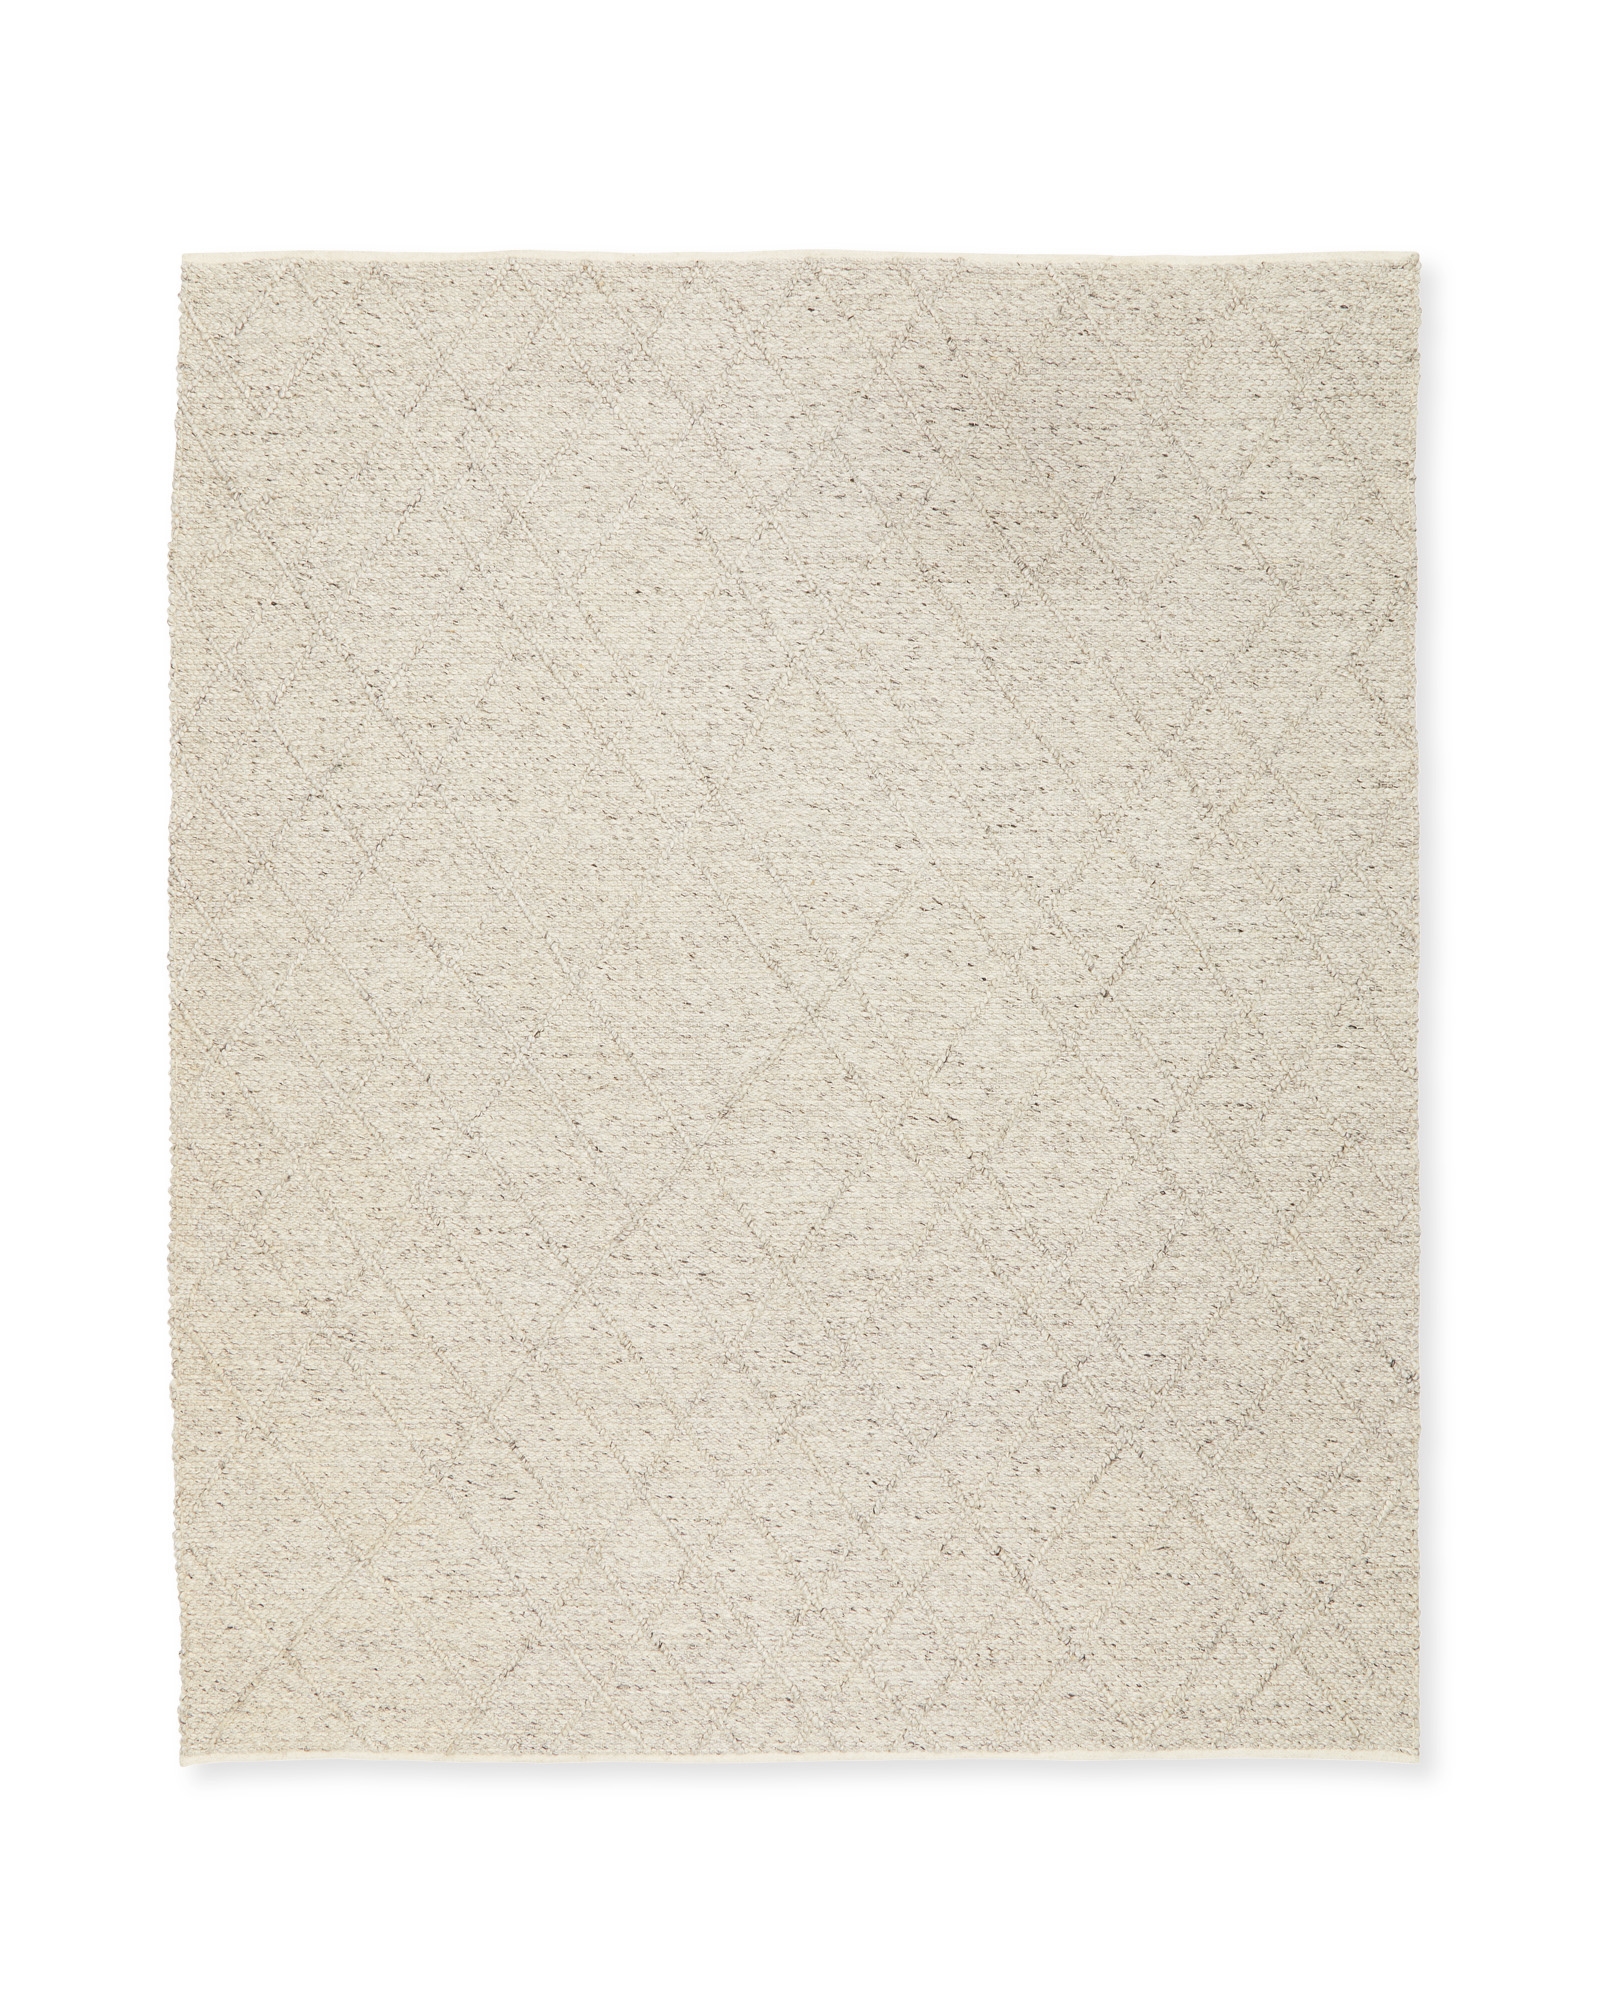 Mulberry Rug - Image 1